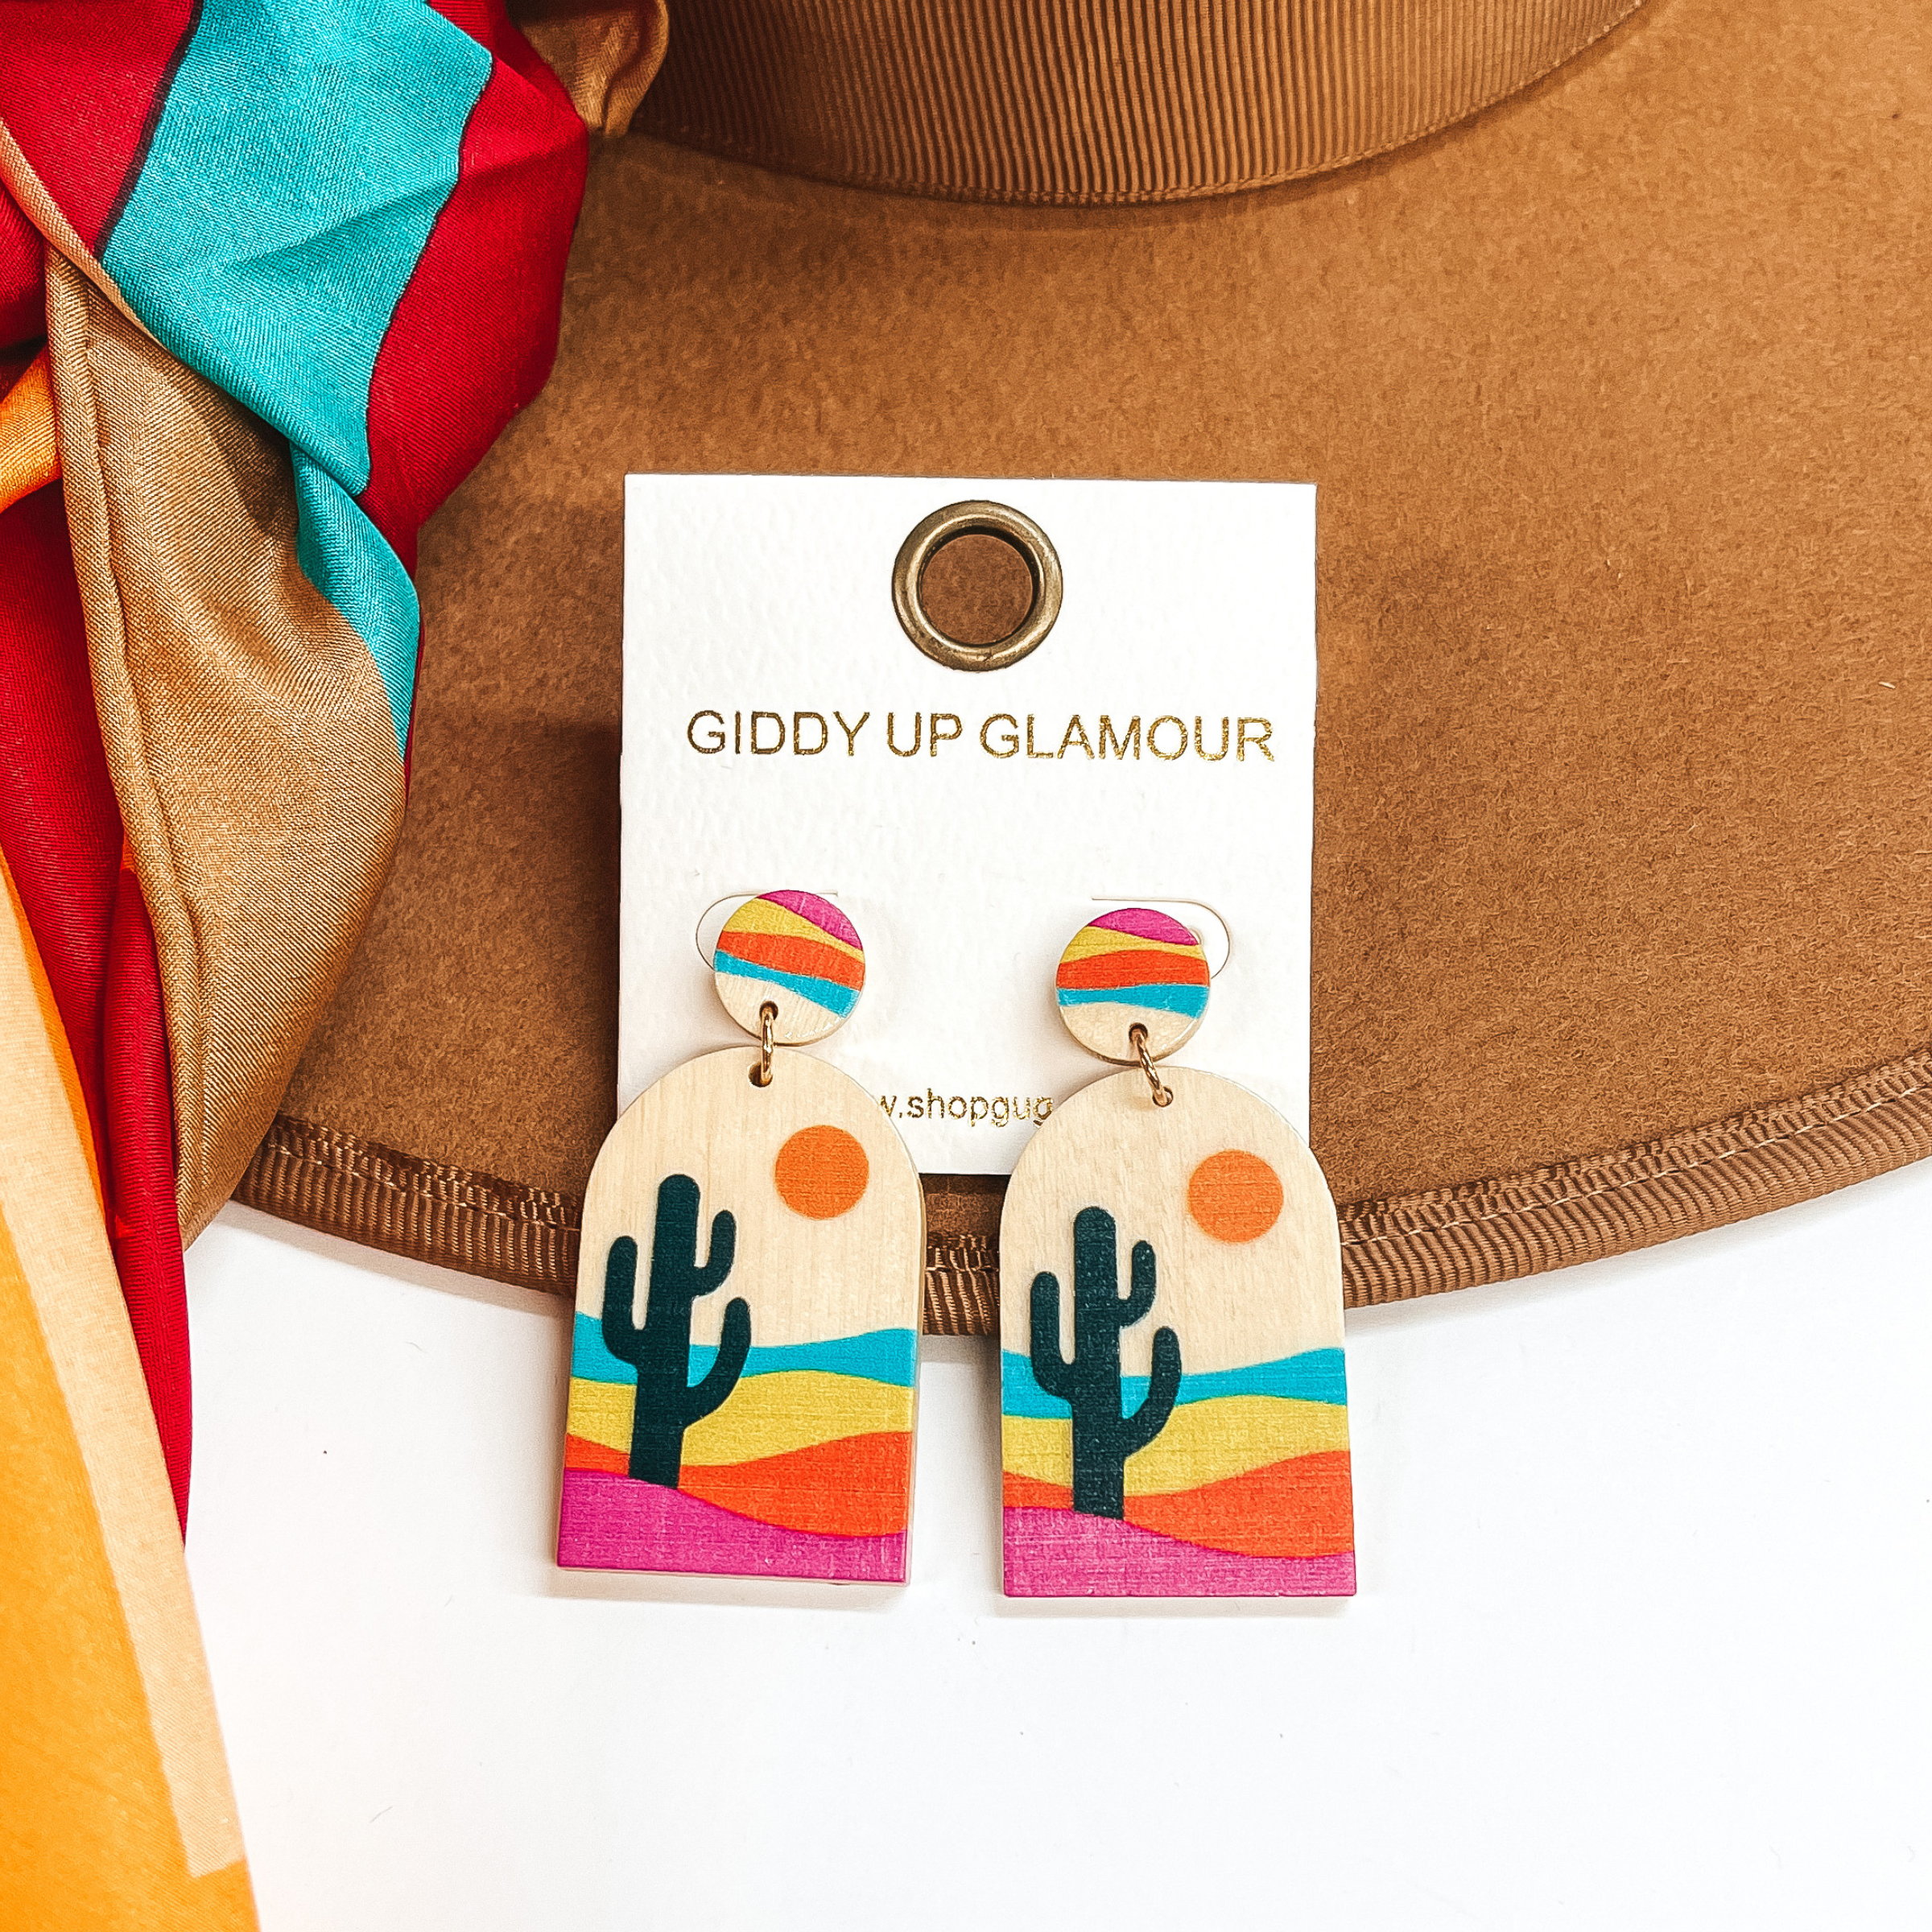 These are wood arch shape earrings with a circle  post back. These earrings has a dark green cactus  in a desert with turquoise, orange, yellow, and pink  colors. These earrings  are taken on a brown hat brim and a white background  with a multicolored wild rag in the side as decor.